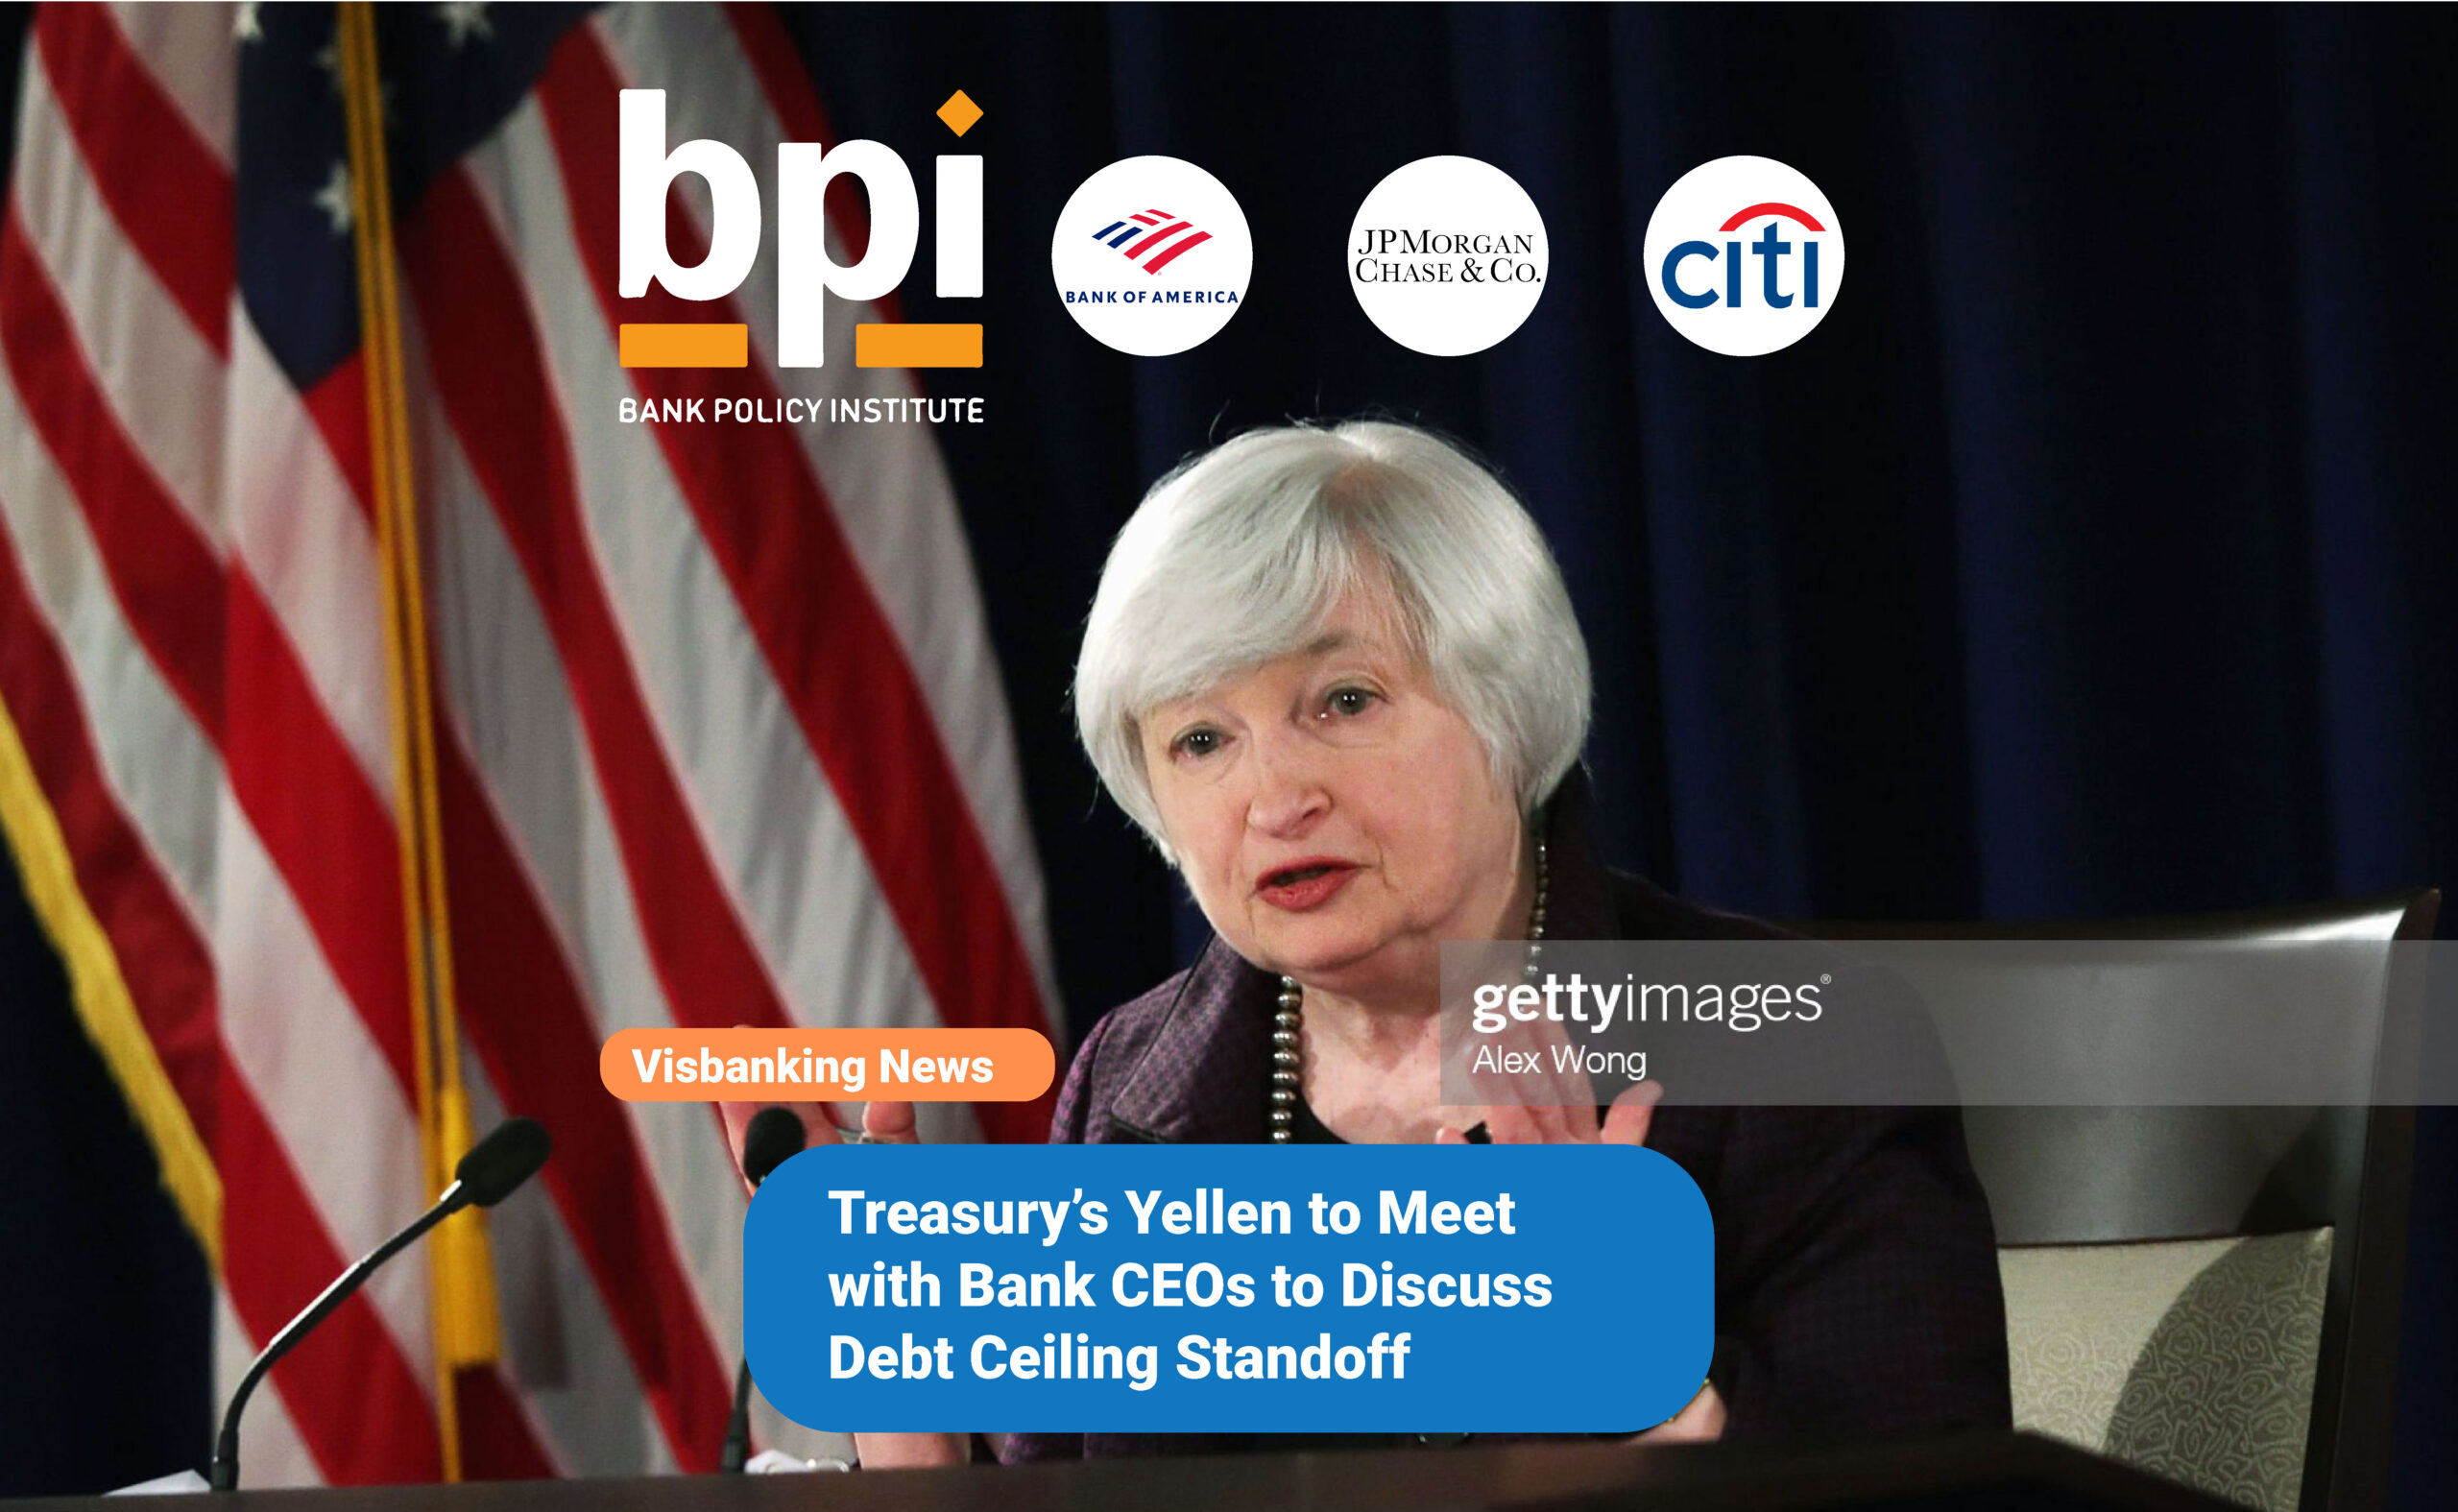 Treasury’s Yellen to Meet with Bank CEOs to Discuss Debt Ceiling Standoff